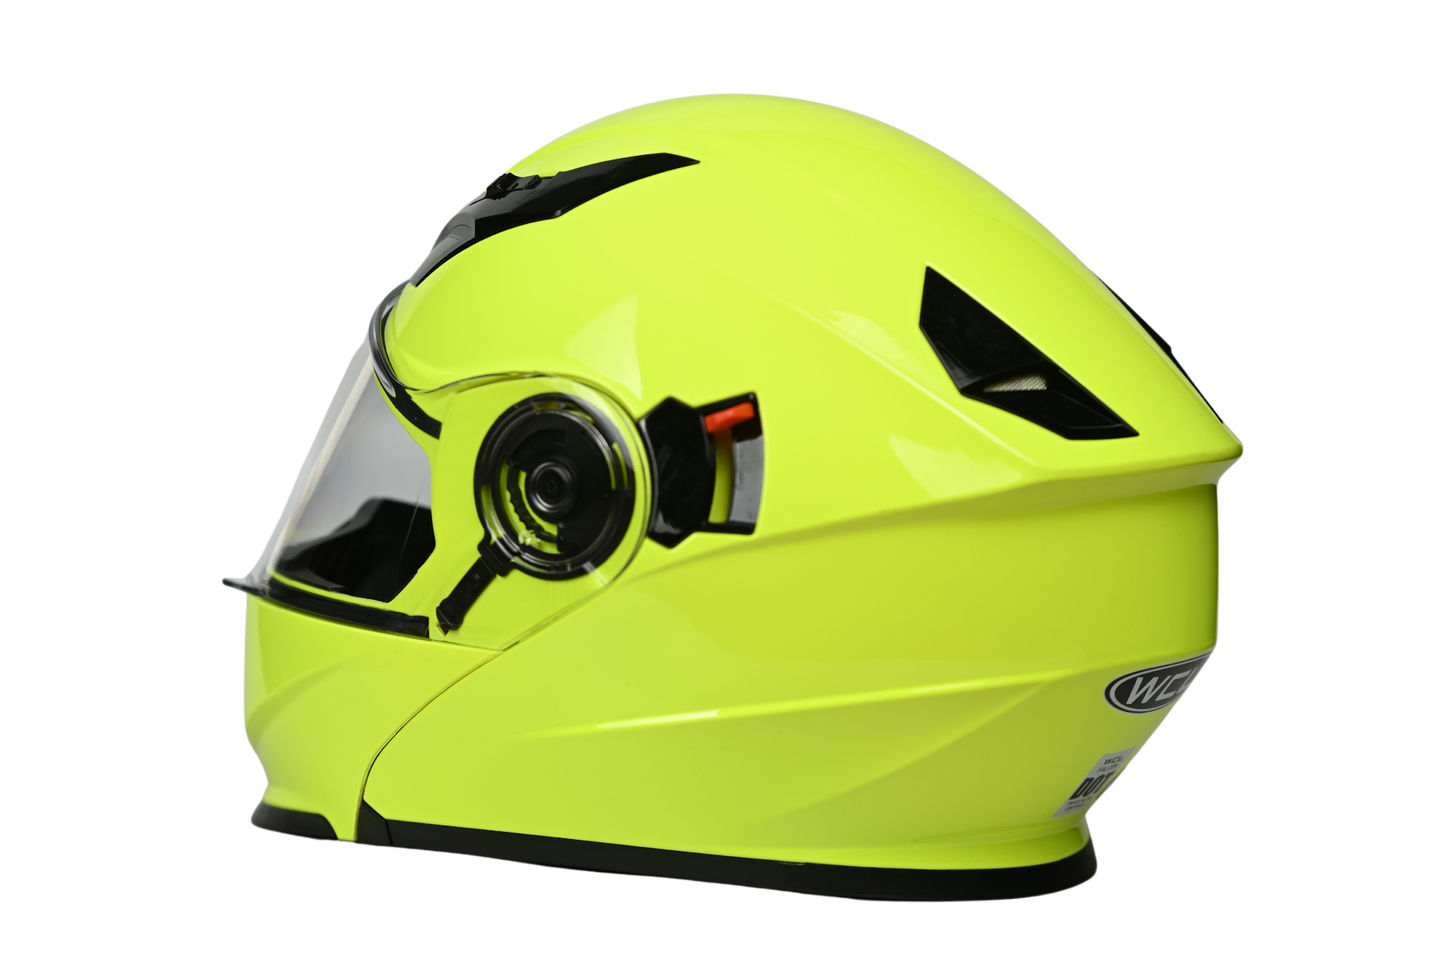 WCL Modular Full Face Motorcycle Helmet with Double Lens Visor - High Visibility